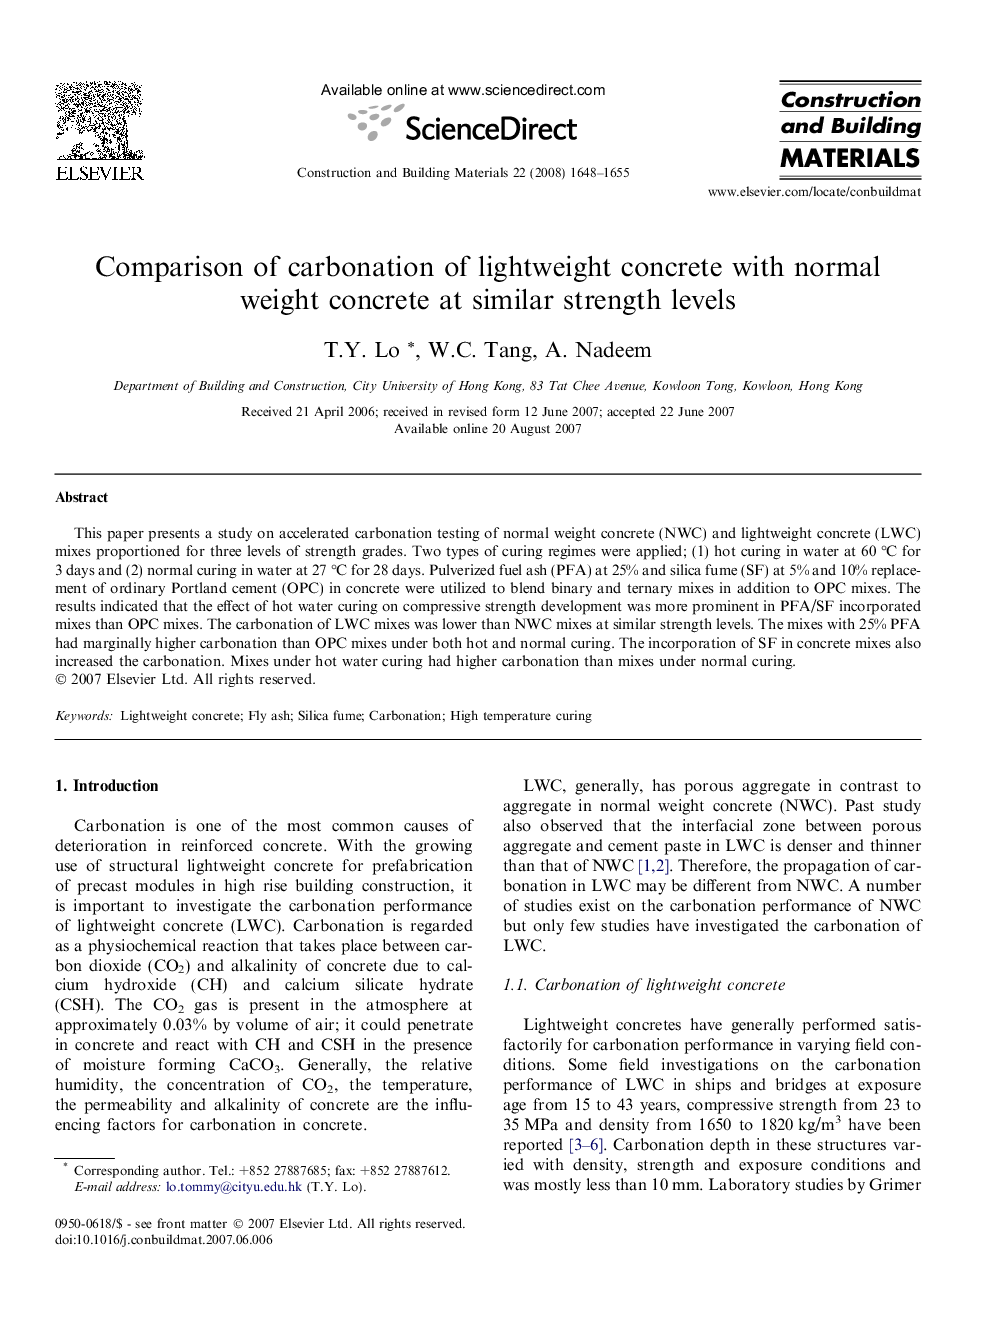 Comparison of carbonation of lightweight concrete with normal weight concrete at similar strength levels